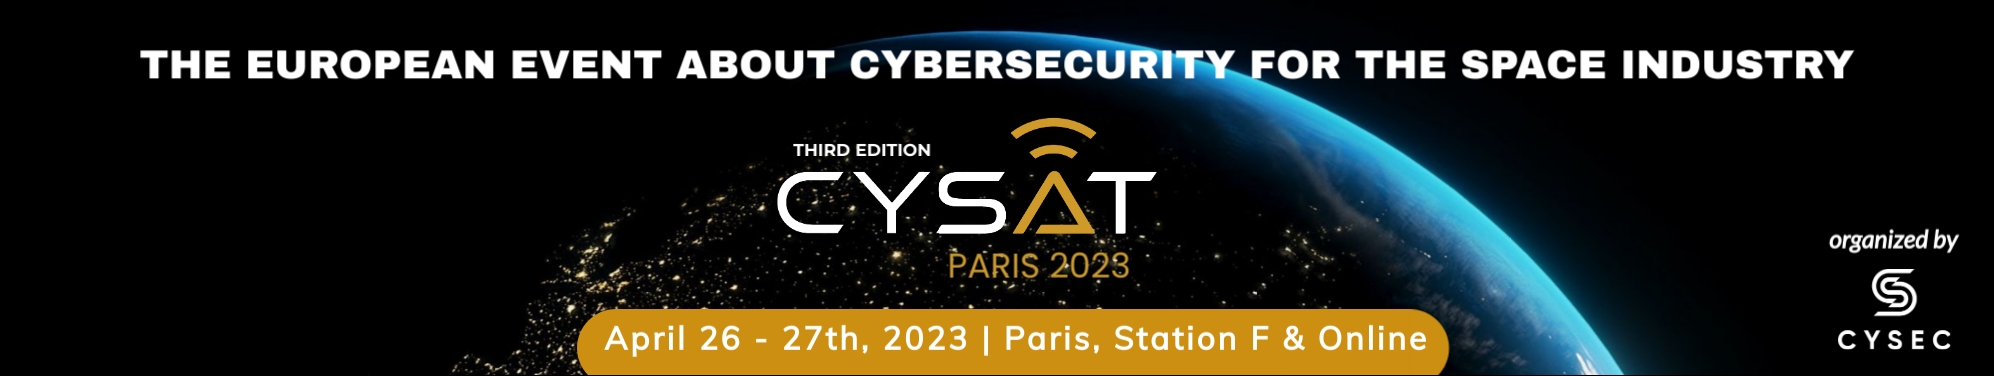 Get your CYSAT ticket and join us in 2023! Link to event website or landing page